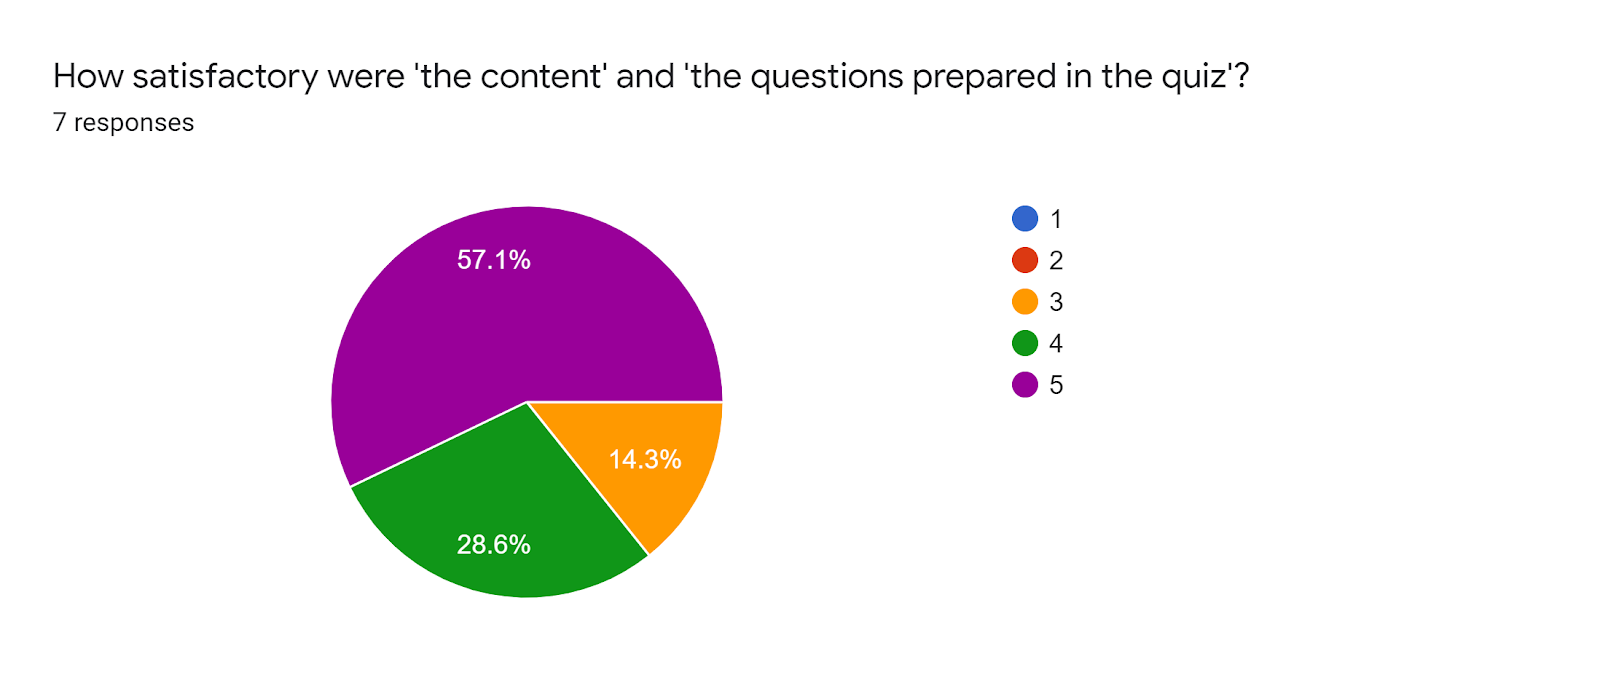 Forms response chart. Question title: How satisfactory were 'the content' and 'the questions prepared in the quiz'? . Number of responses: 7 responses.